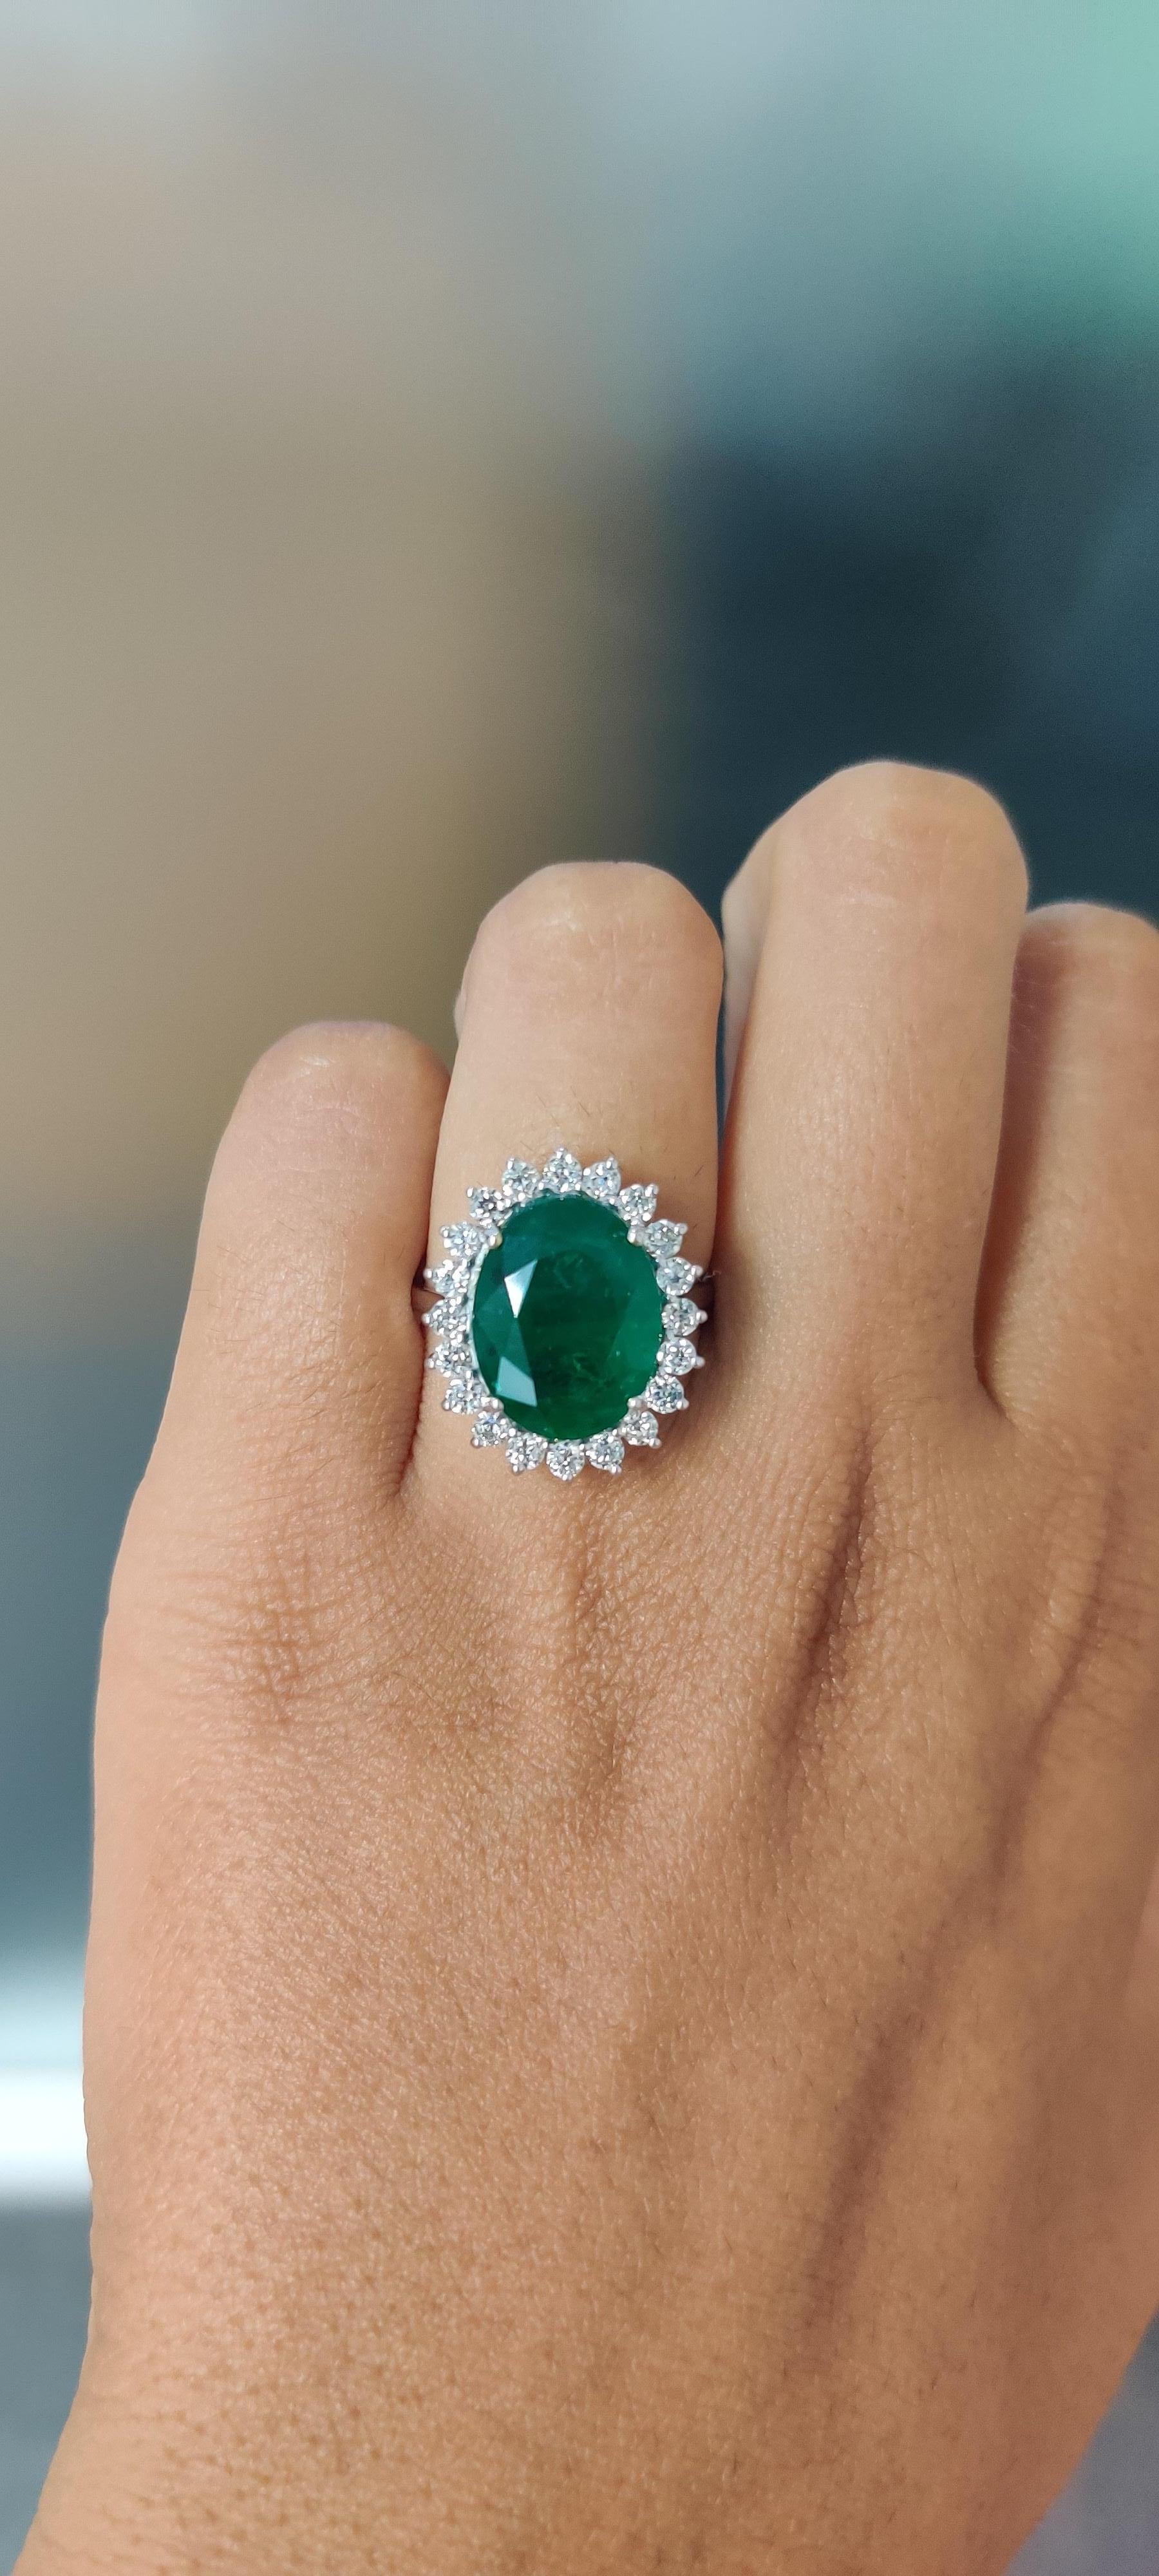 Oval Cut Christmas Special 7.11 Carat Zambian Emerald Ring with Old Cut Diamonds